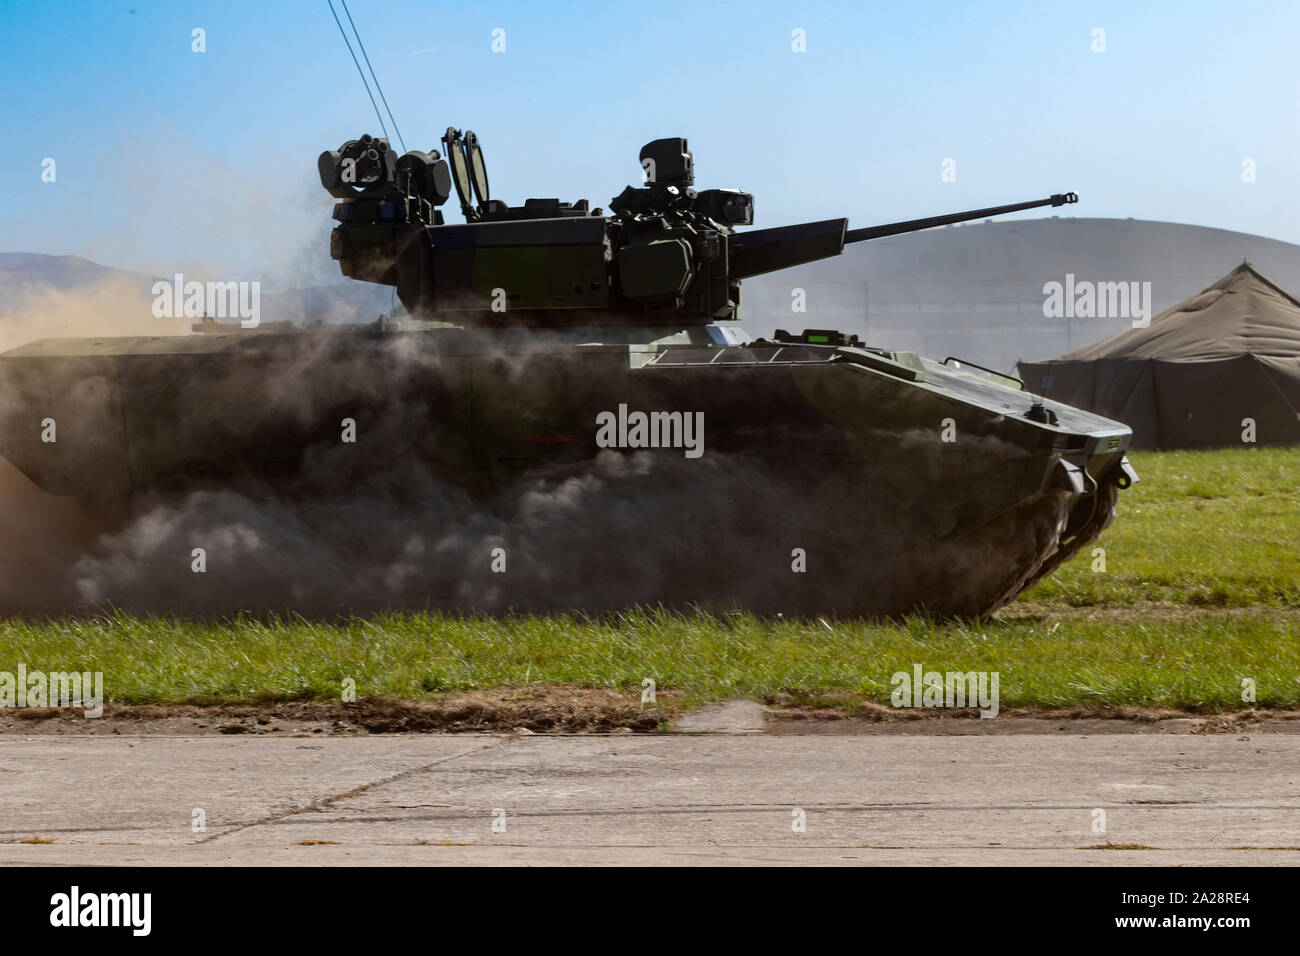 OSTRAVA, CZECH REPUBLIC - SEPTEMBER 21, 2019: NATO Days. ASCOD armored fighting vehicle, new acquisition of the Czech armed forces, performs a demonst Stock Photo